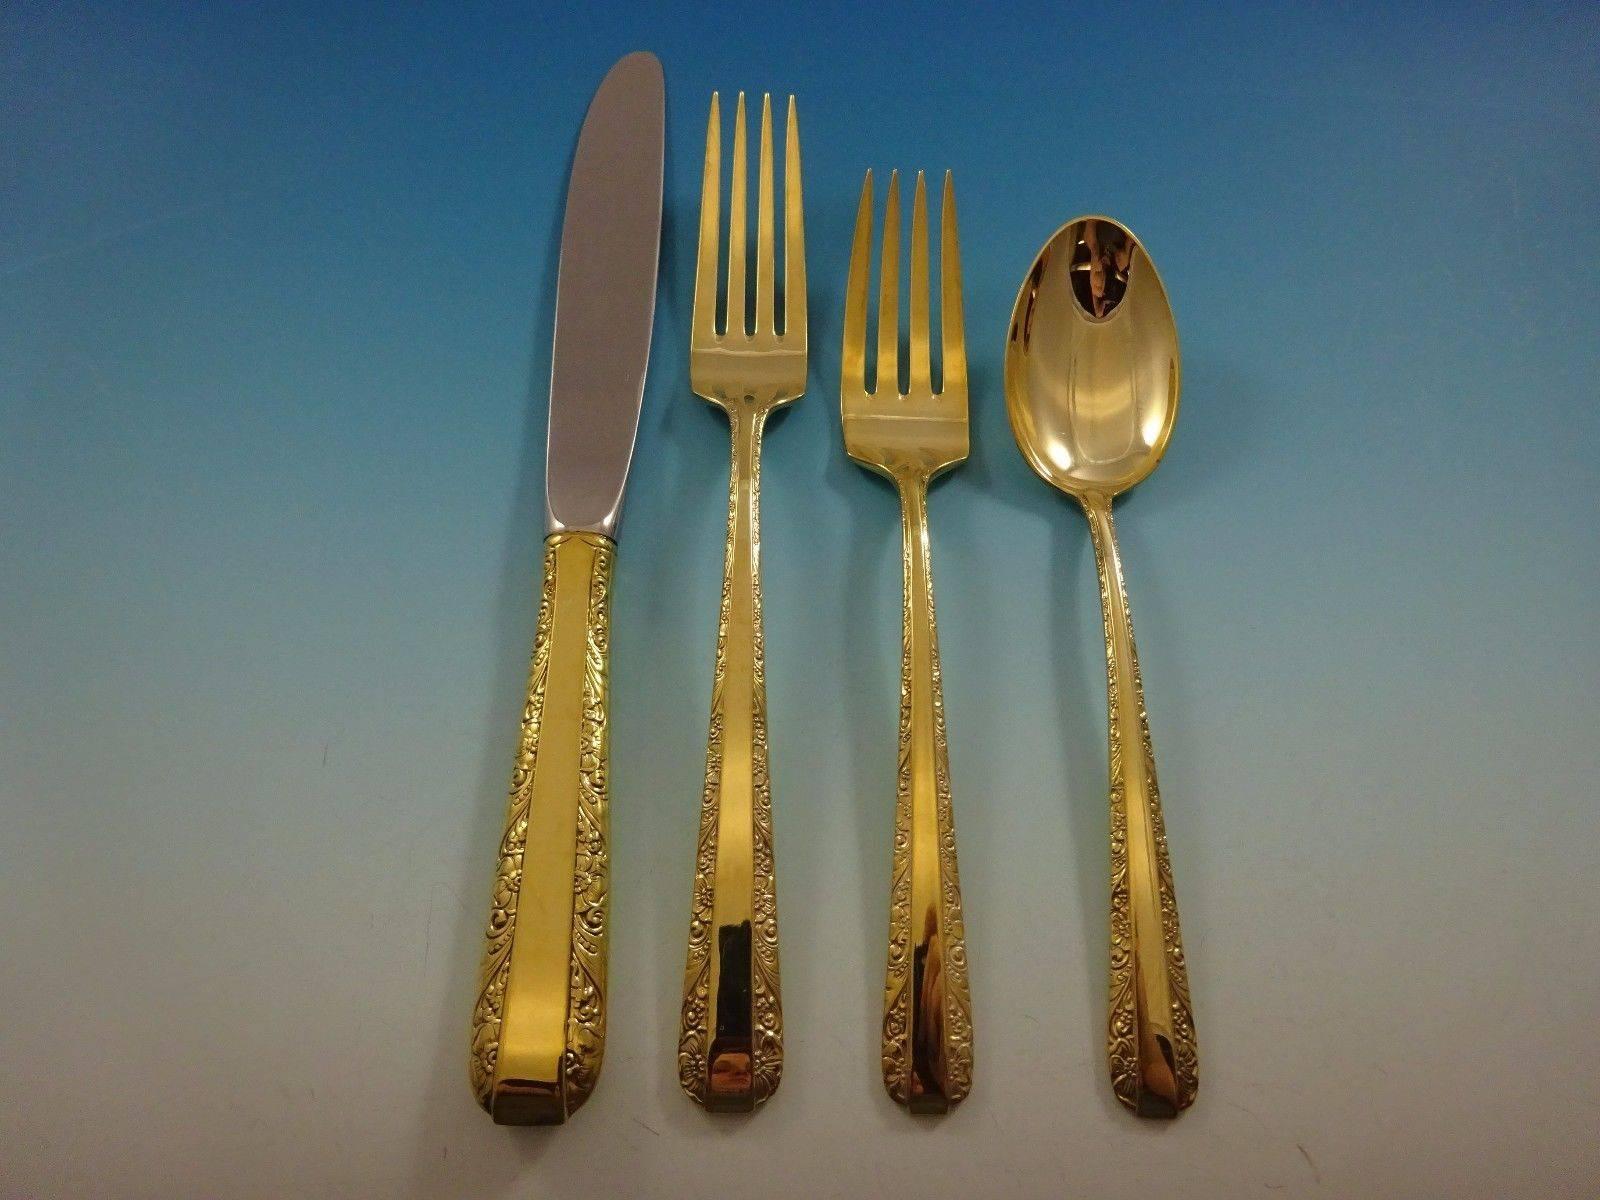 Candlelight Gold by Towle sterling silver flatware set of 48 pieces. Gold flatware is on trend and makes a bold statement on your table. 

This set is vermeil (completely gold-washed) and includes:

12 knives, 8 1/2